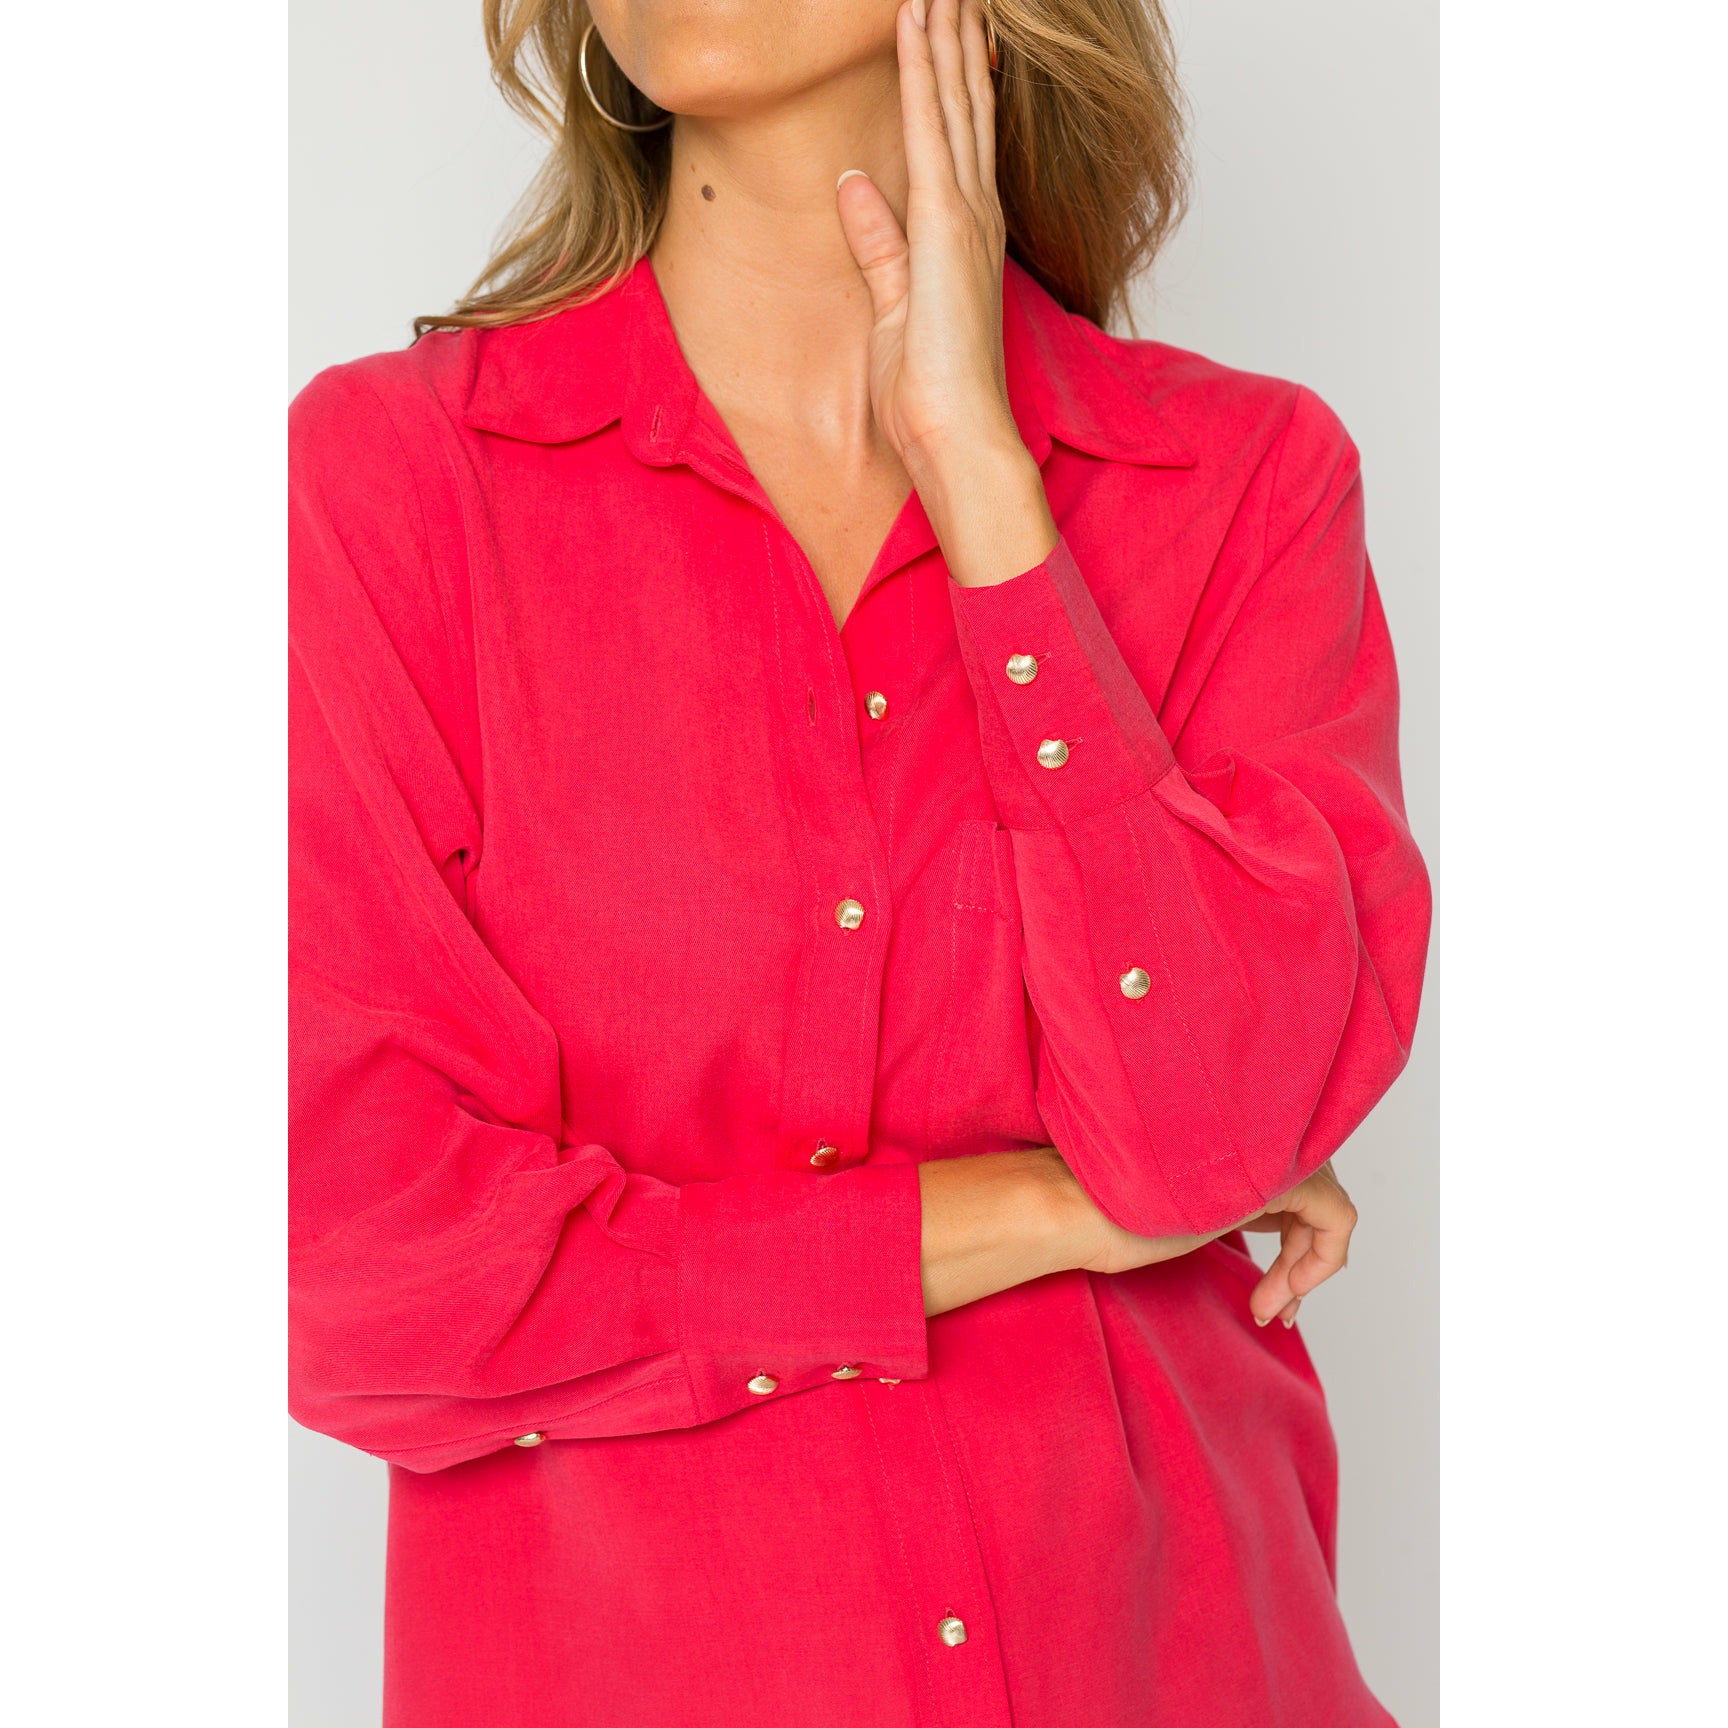 strawberry red women's blouse